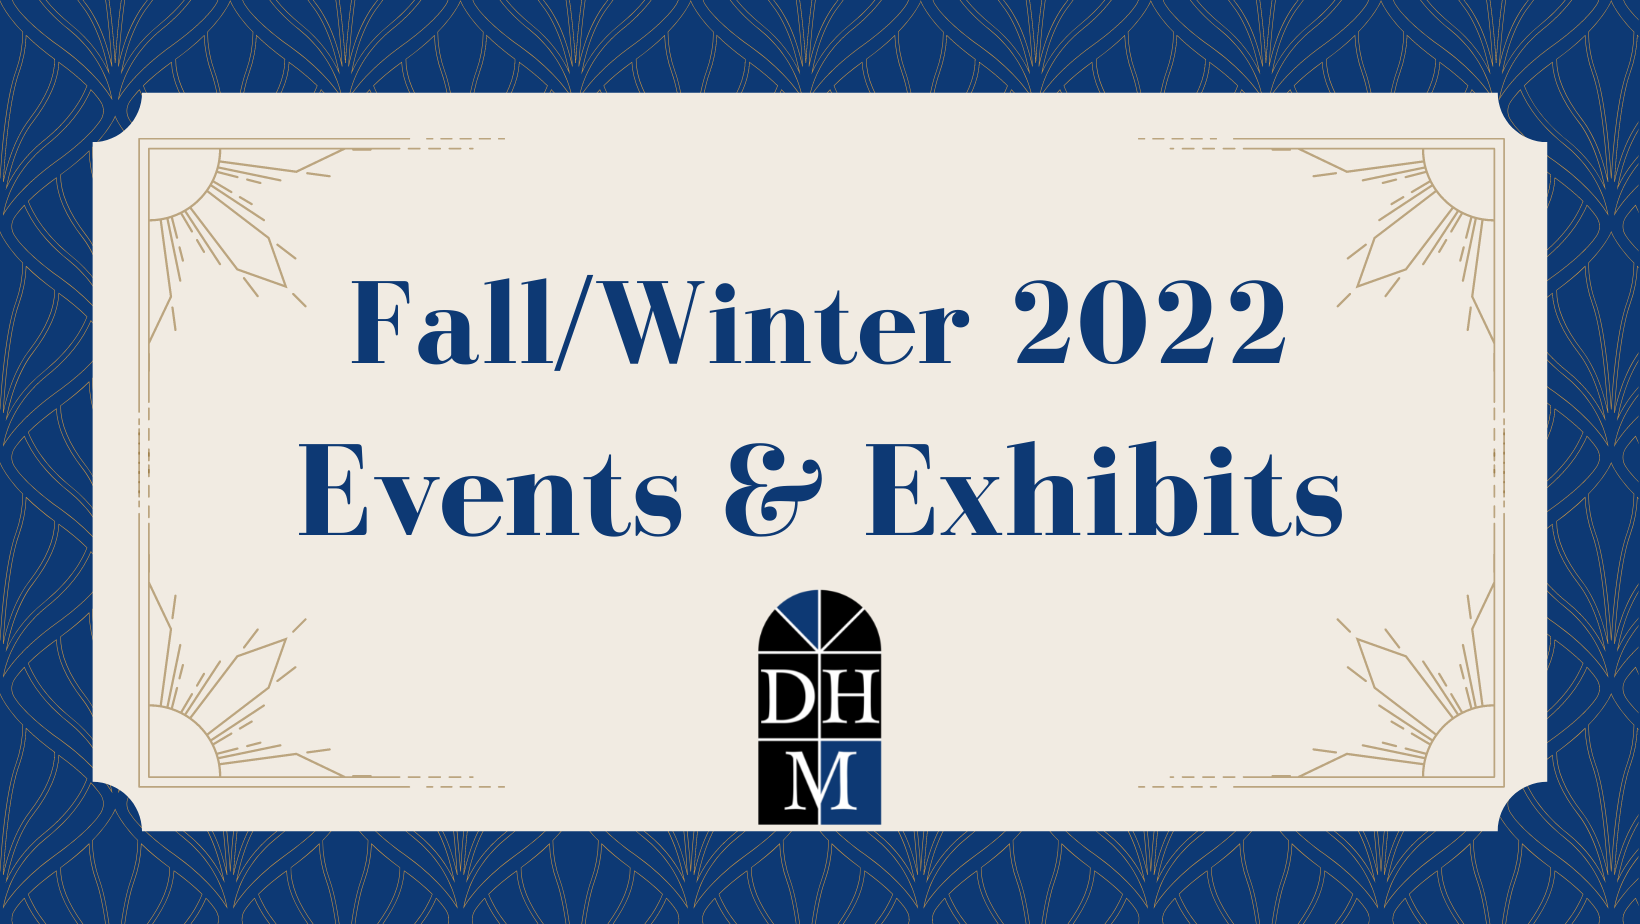 Fall/Winter 2022 Events and Exhibits